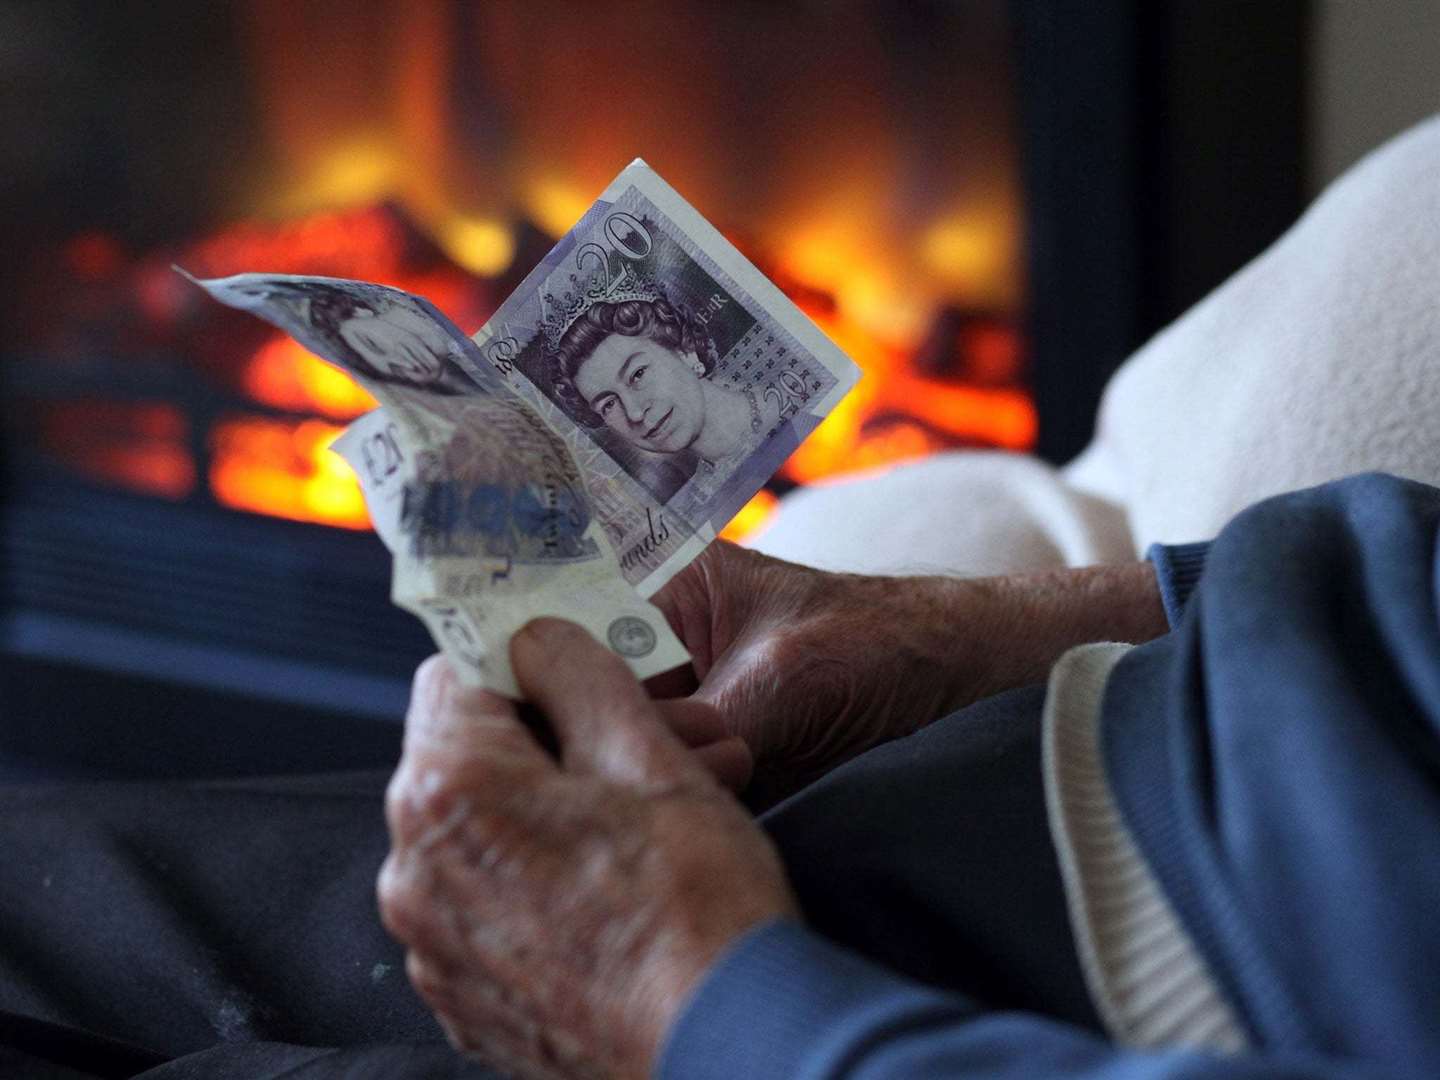 The Home Heating Support Fund can help those on low incomes heat their homes.